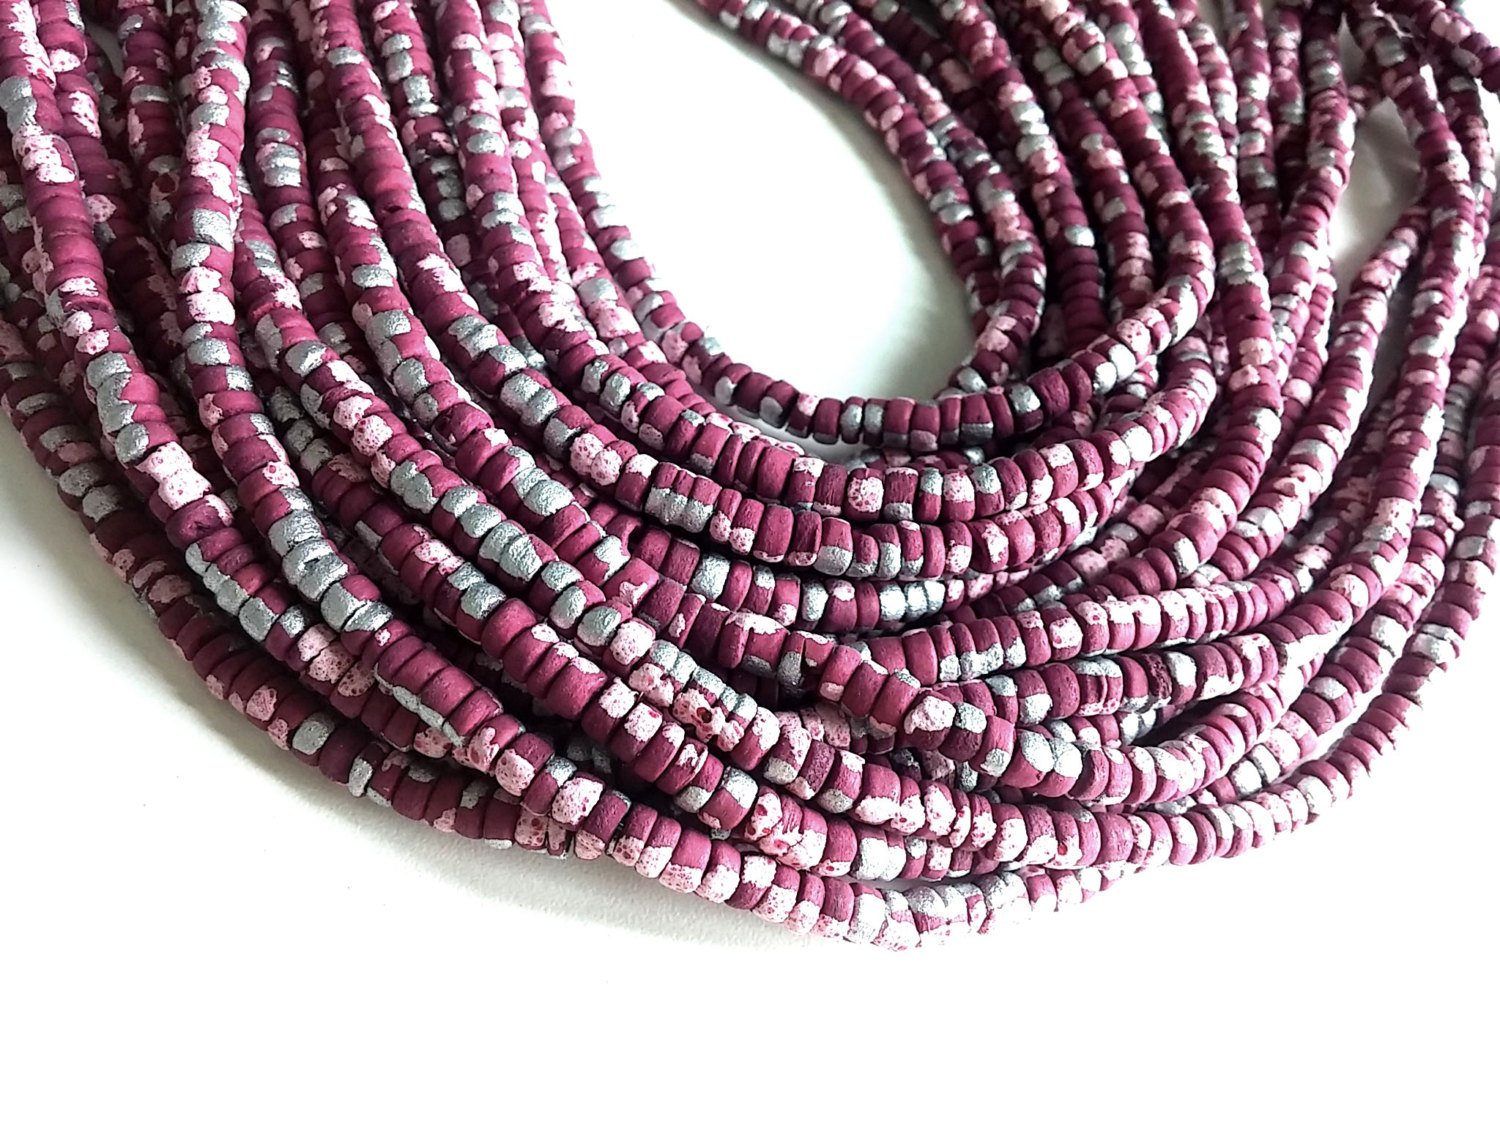 150 coconut beads marblized wine red, pink and silver splashing 4-5mm